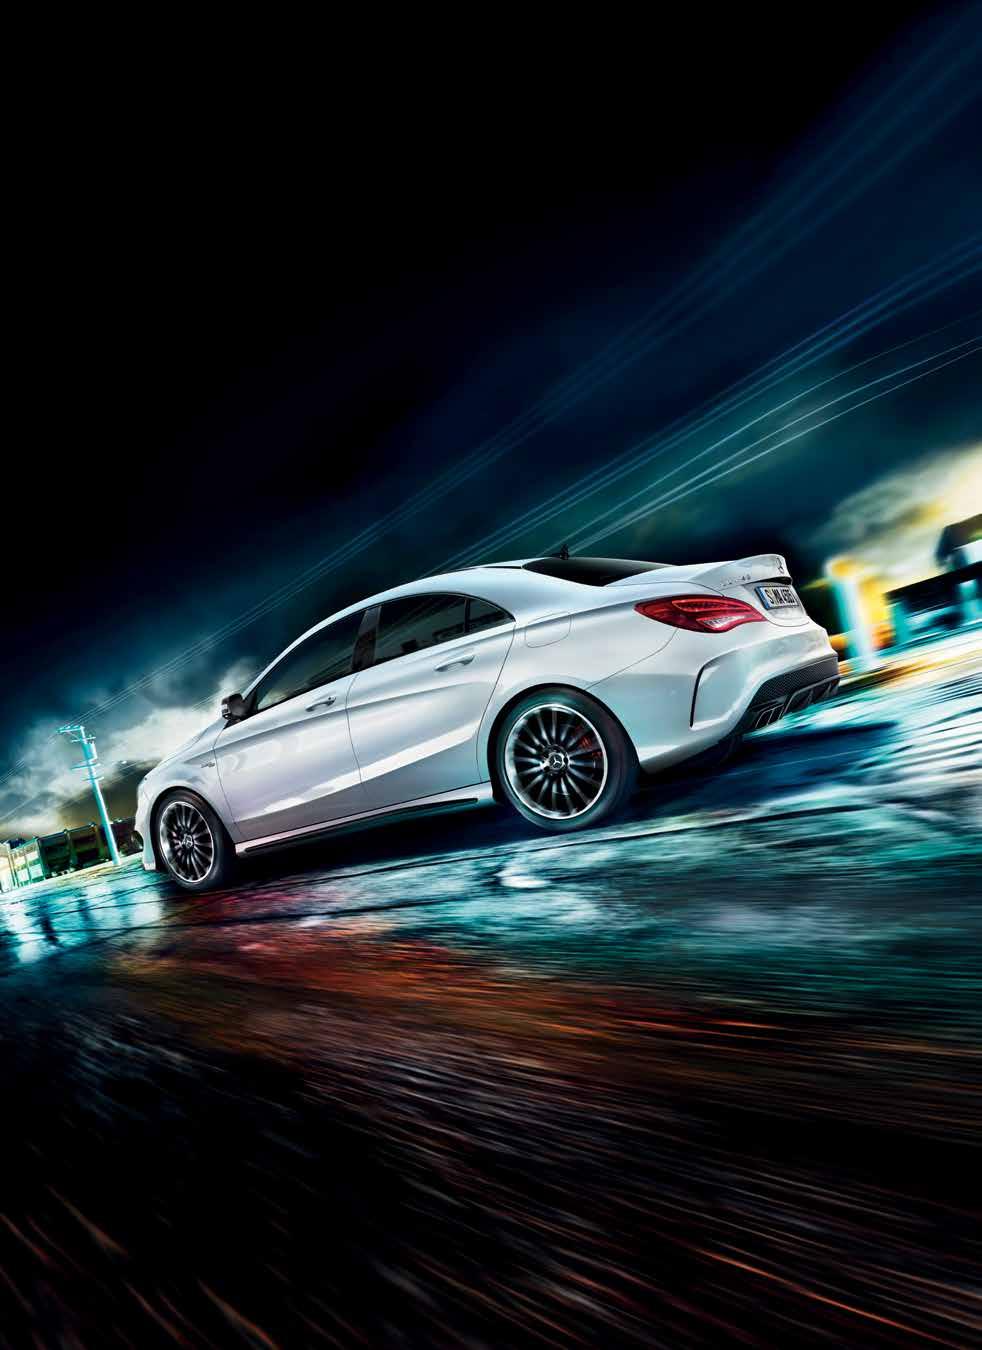 CLA-Class Powerful non-conformist is what the all-new CLA 45 AMG has been labelled and it has all it takes to own that title.